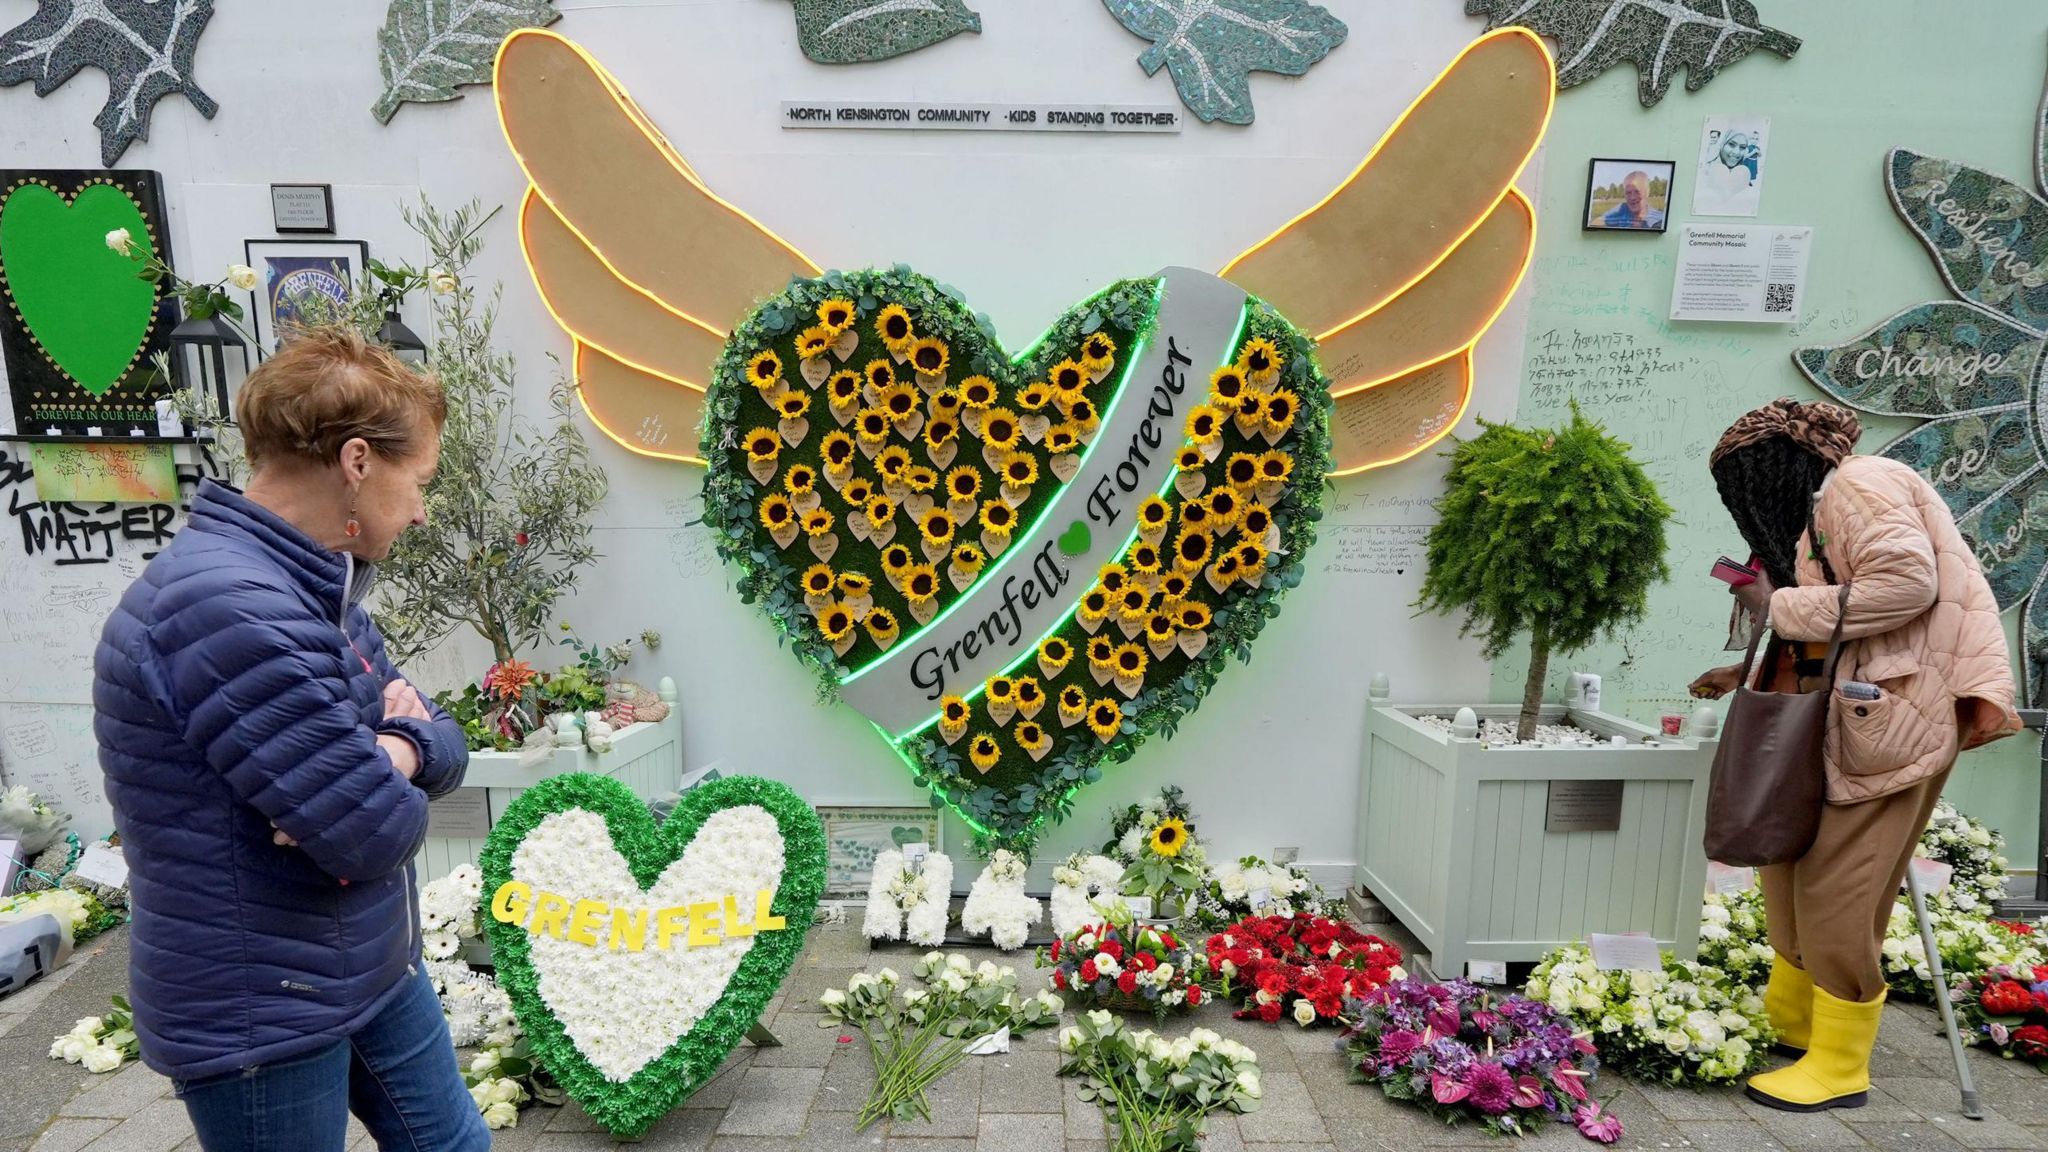 The memorial at the base of Grenfell Tower